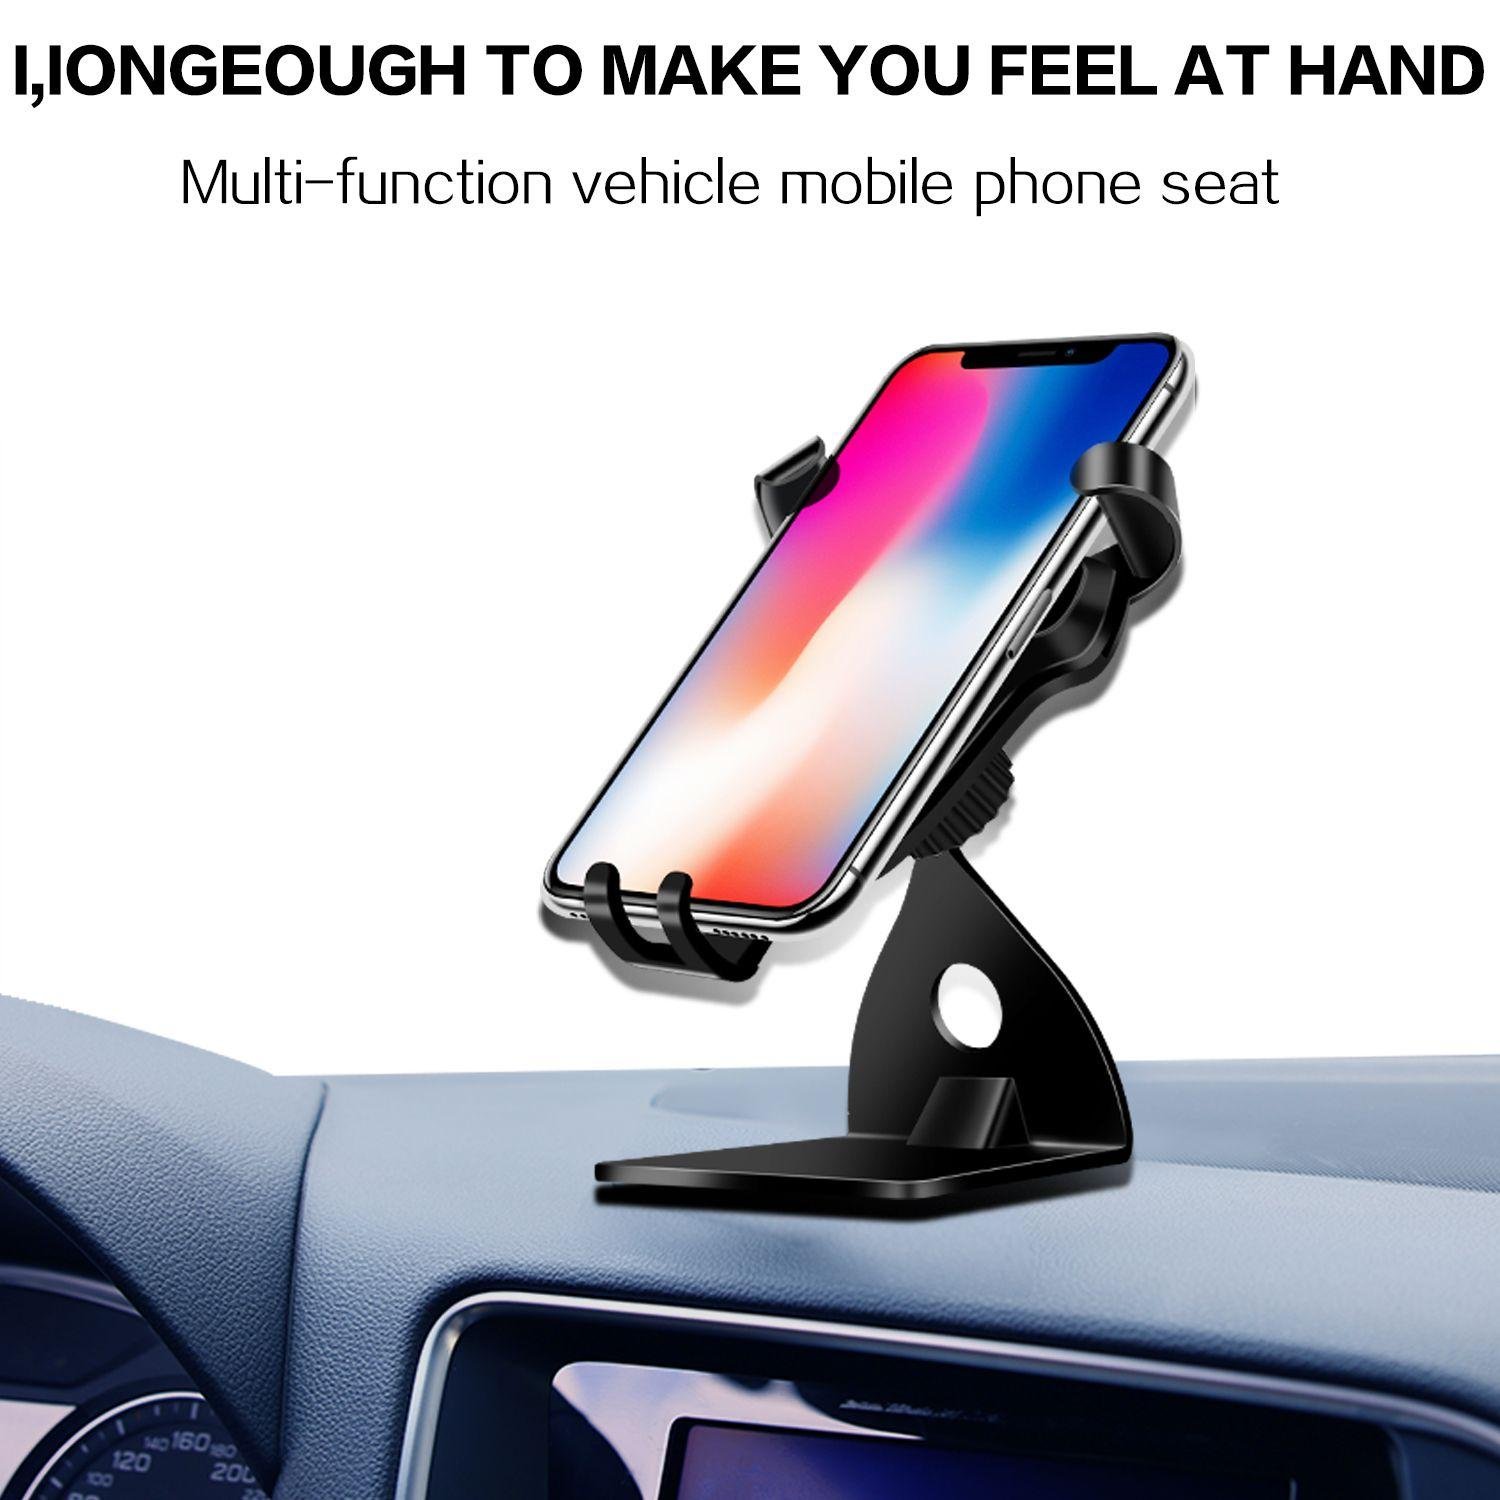 Vehicle wireless charger